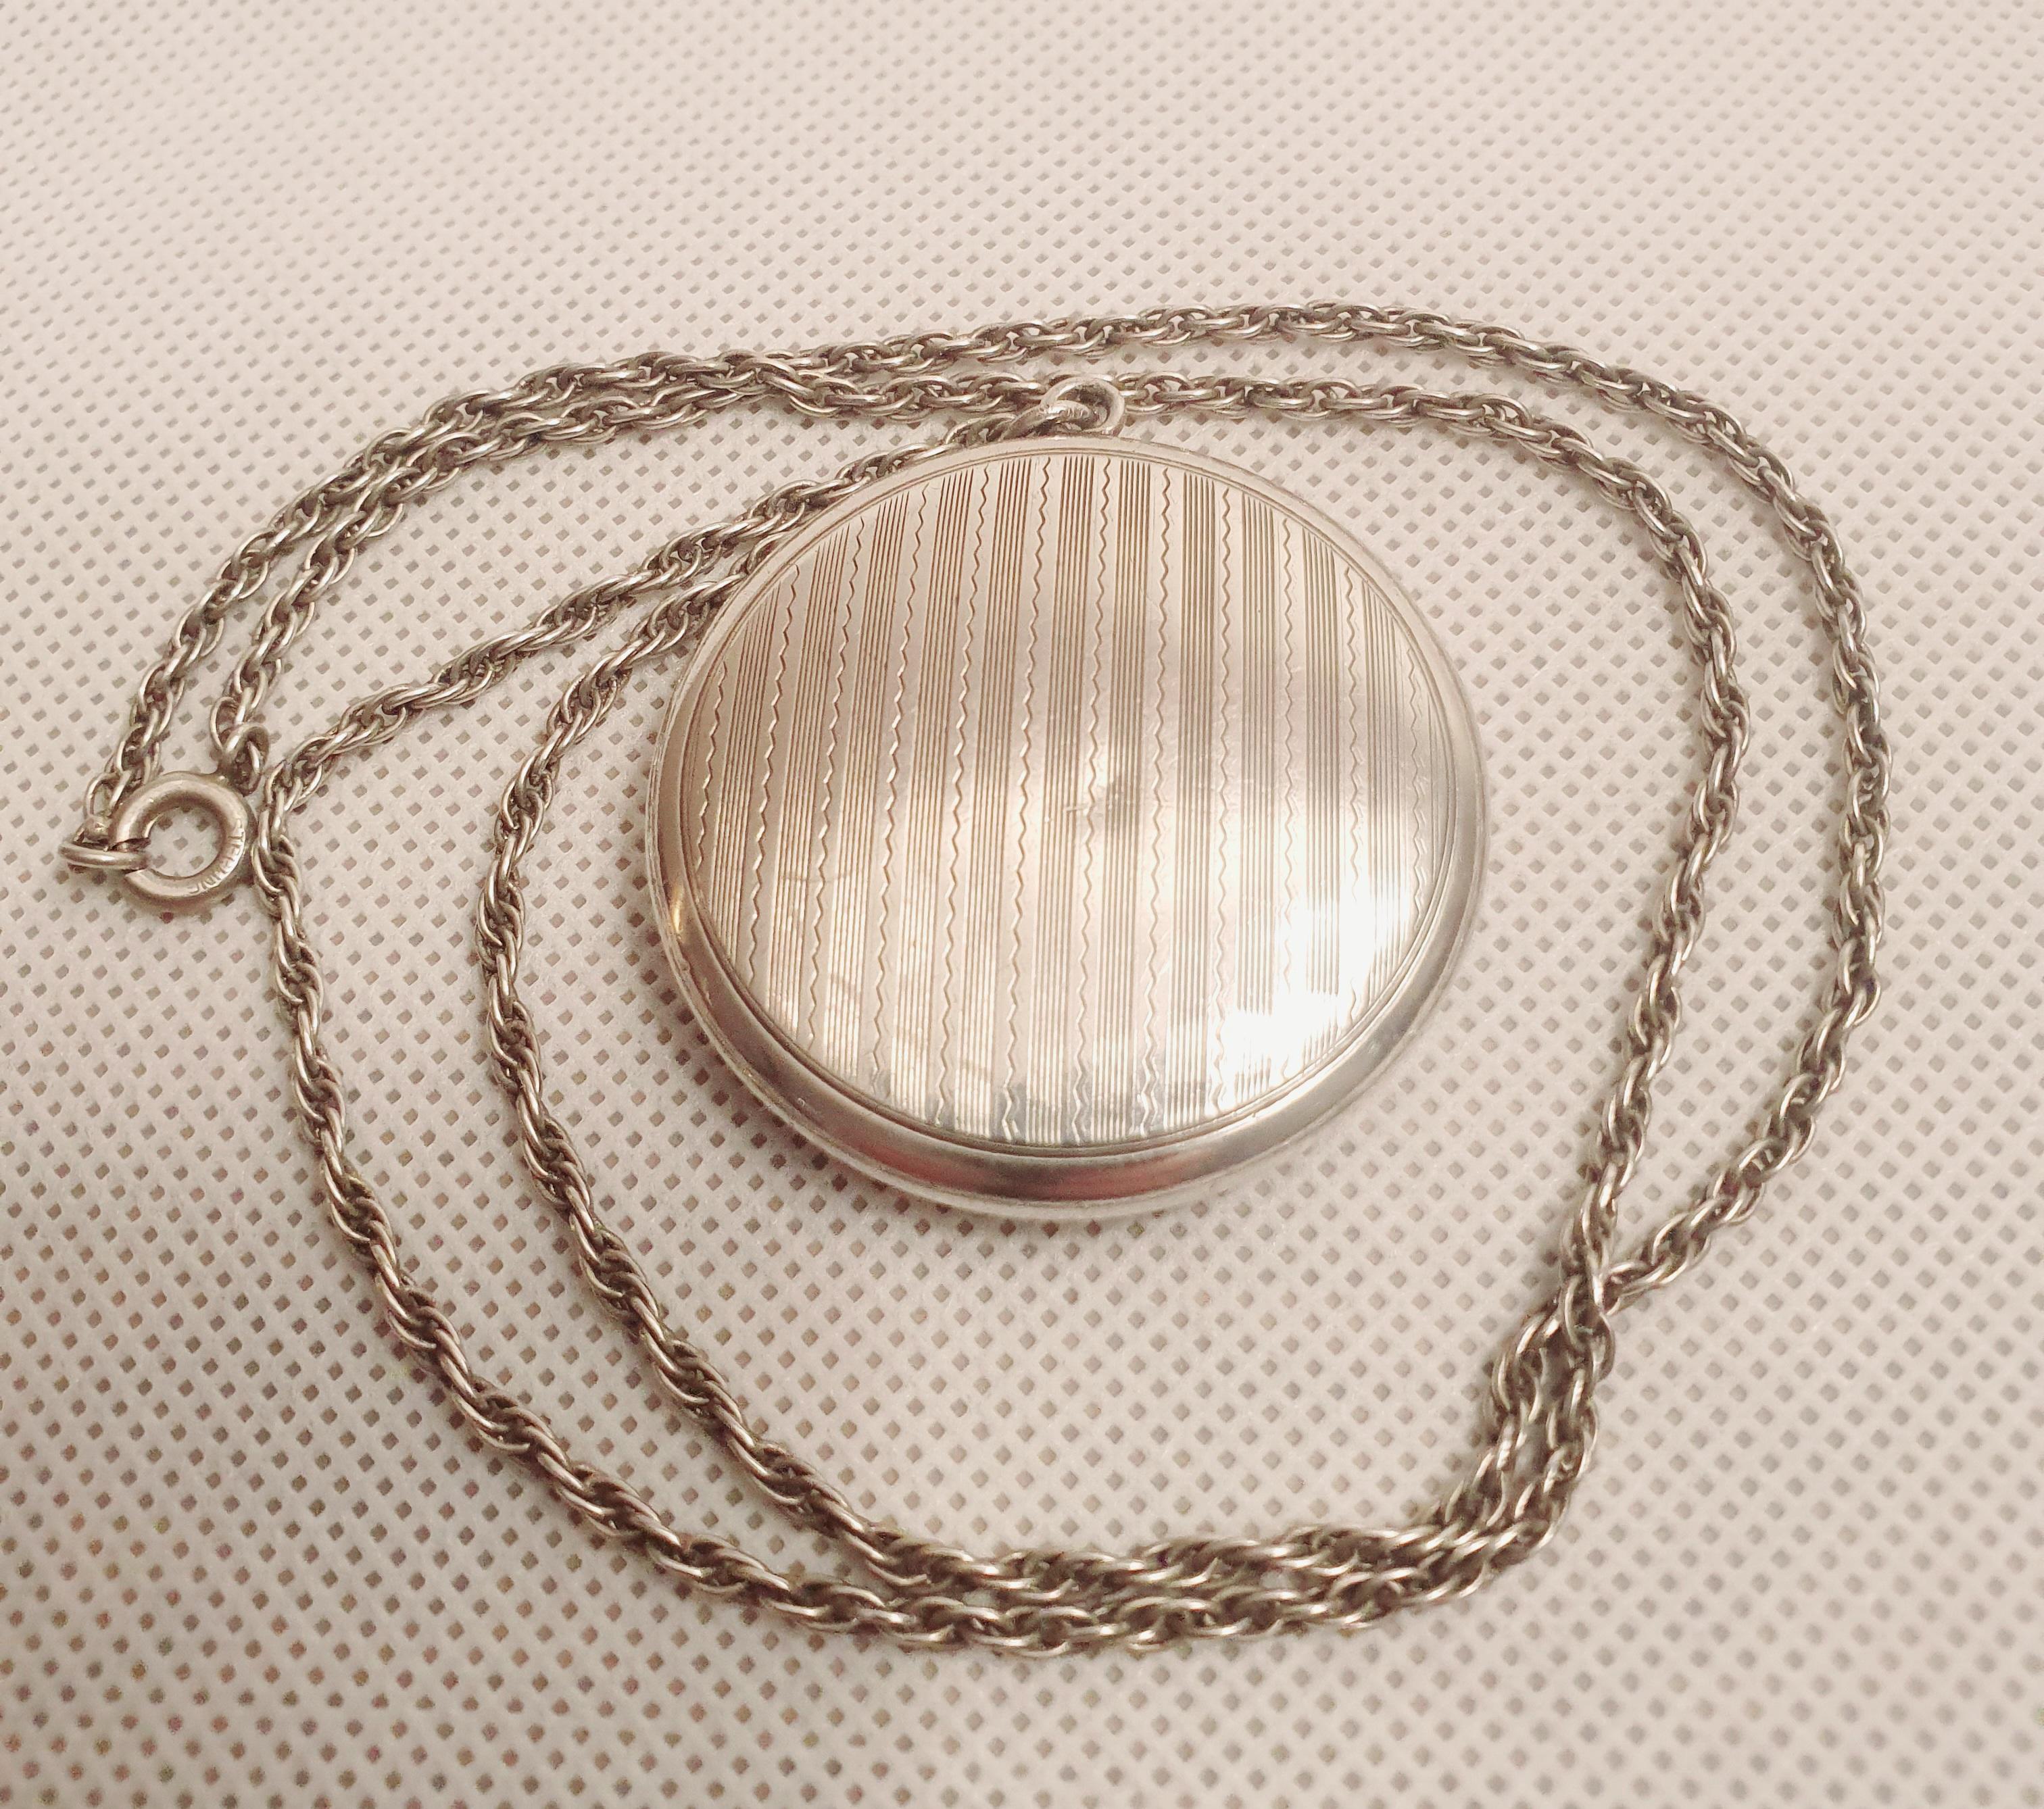 Silver Mirror Pendant on Sterling Silver Chain marked C&C 925